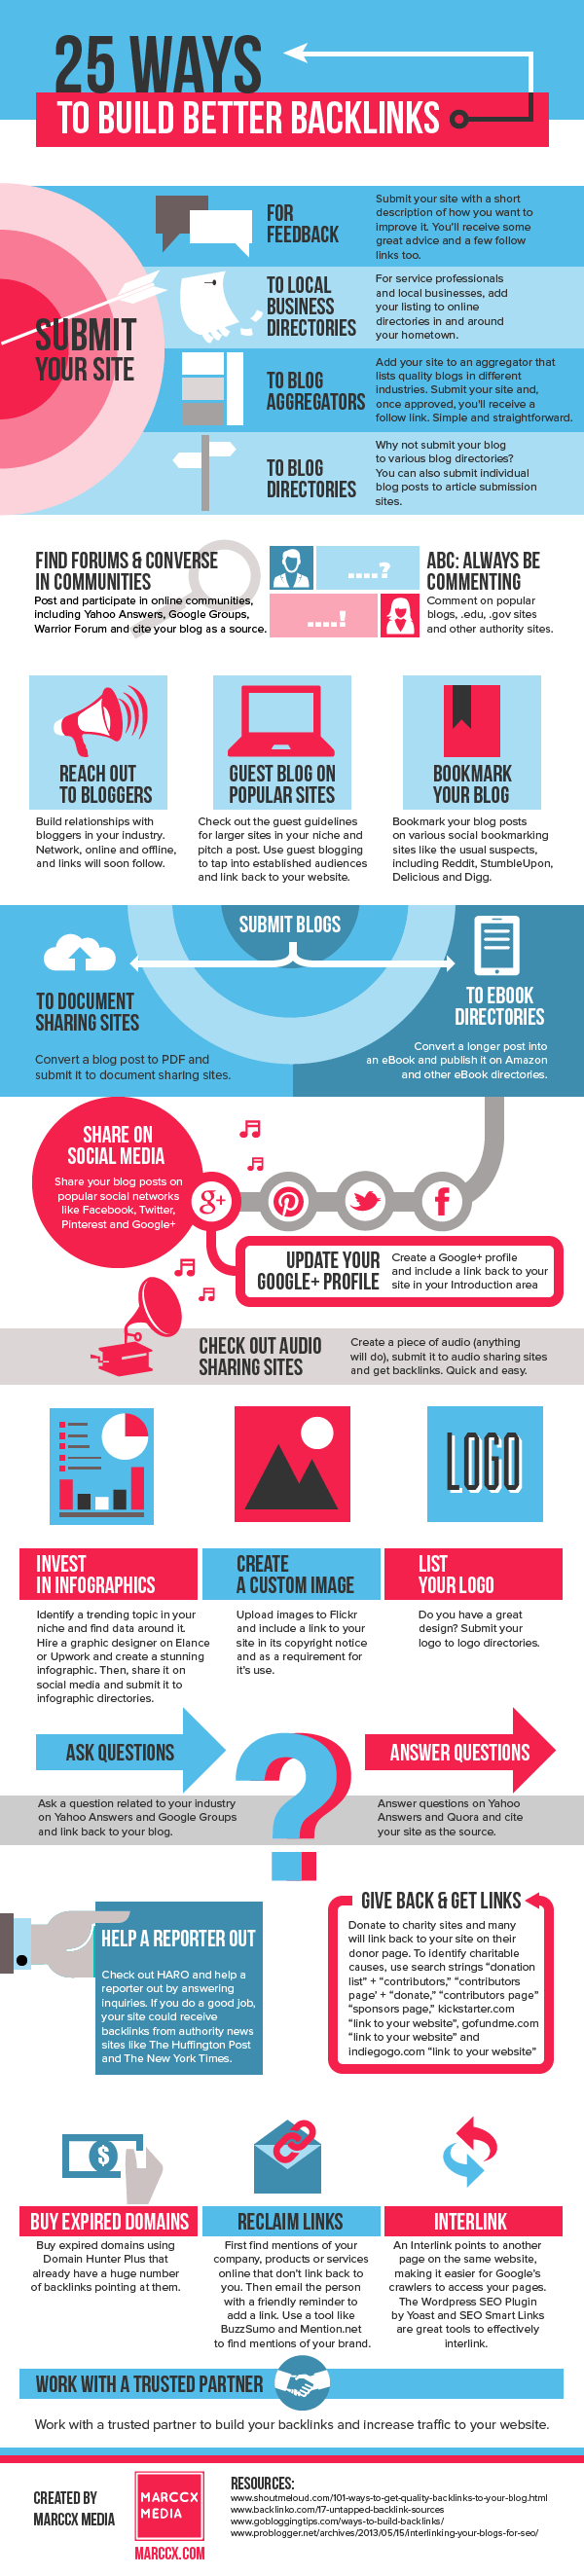 25 Ways to Build Backlinks - #Infographic